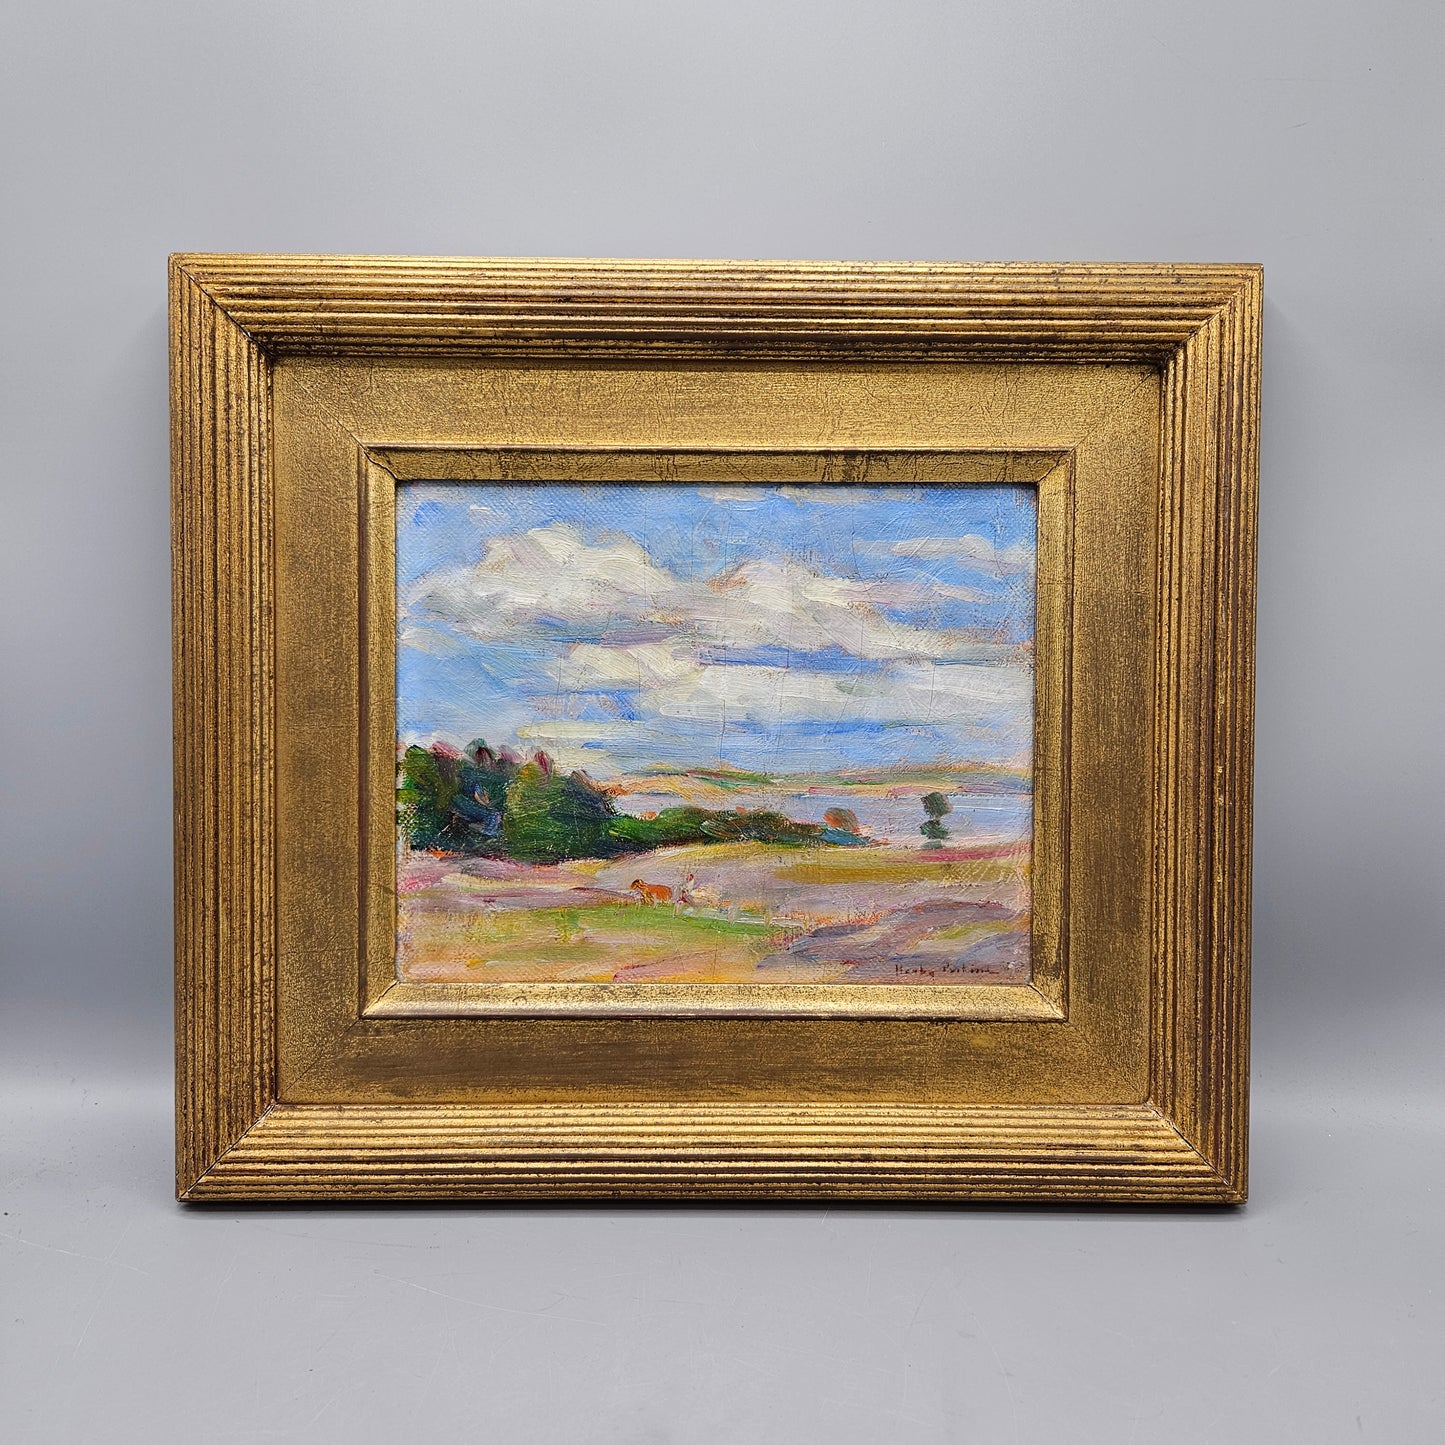 Harley Manlius Perkins (1883-1964) New England Landscape Painting on Board